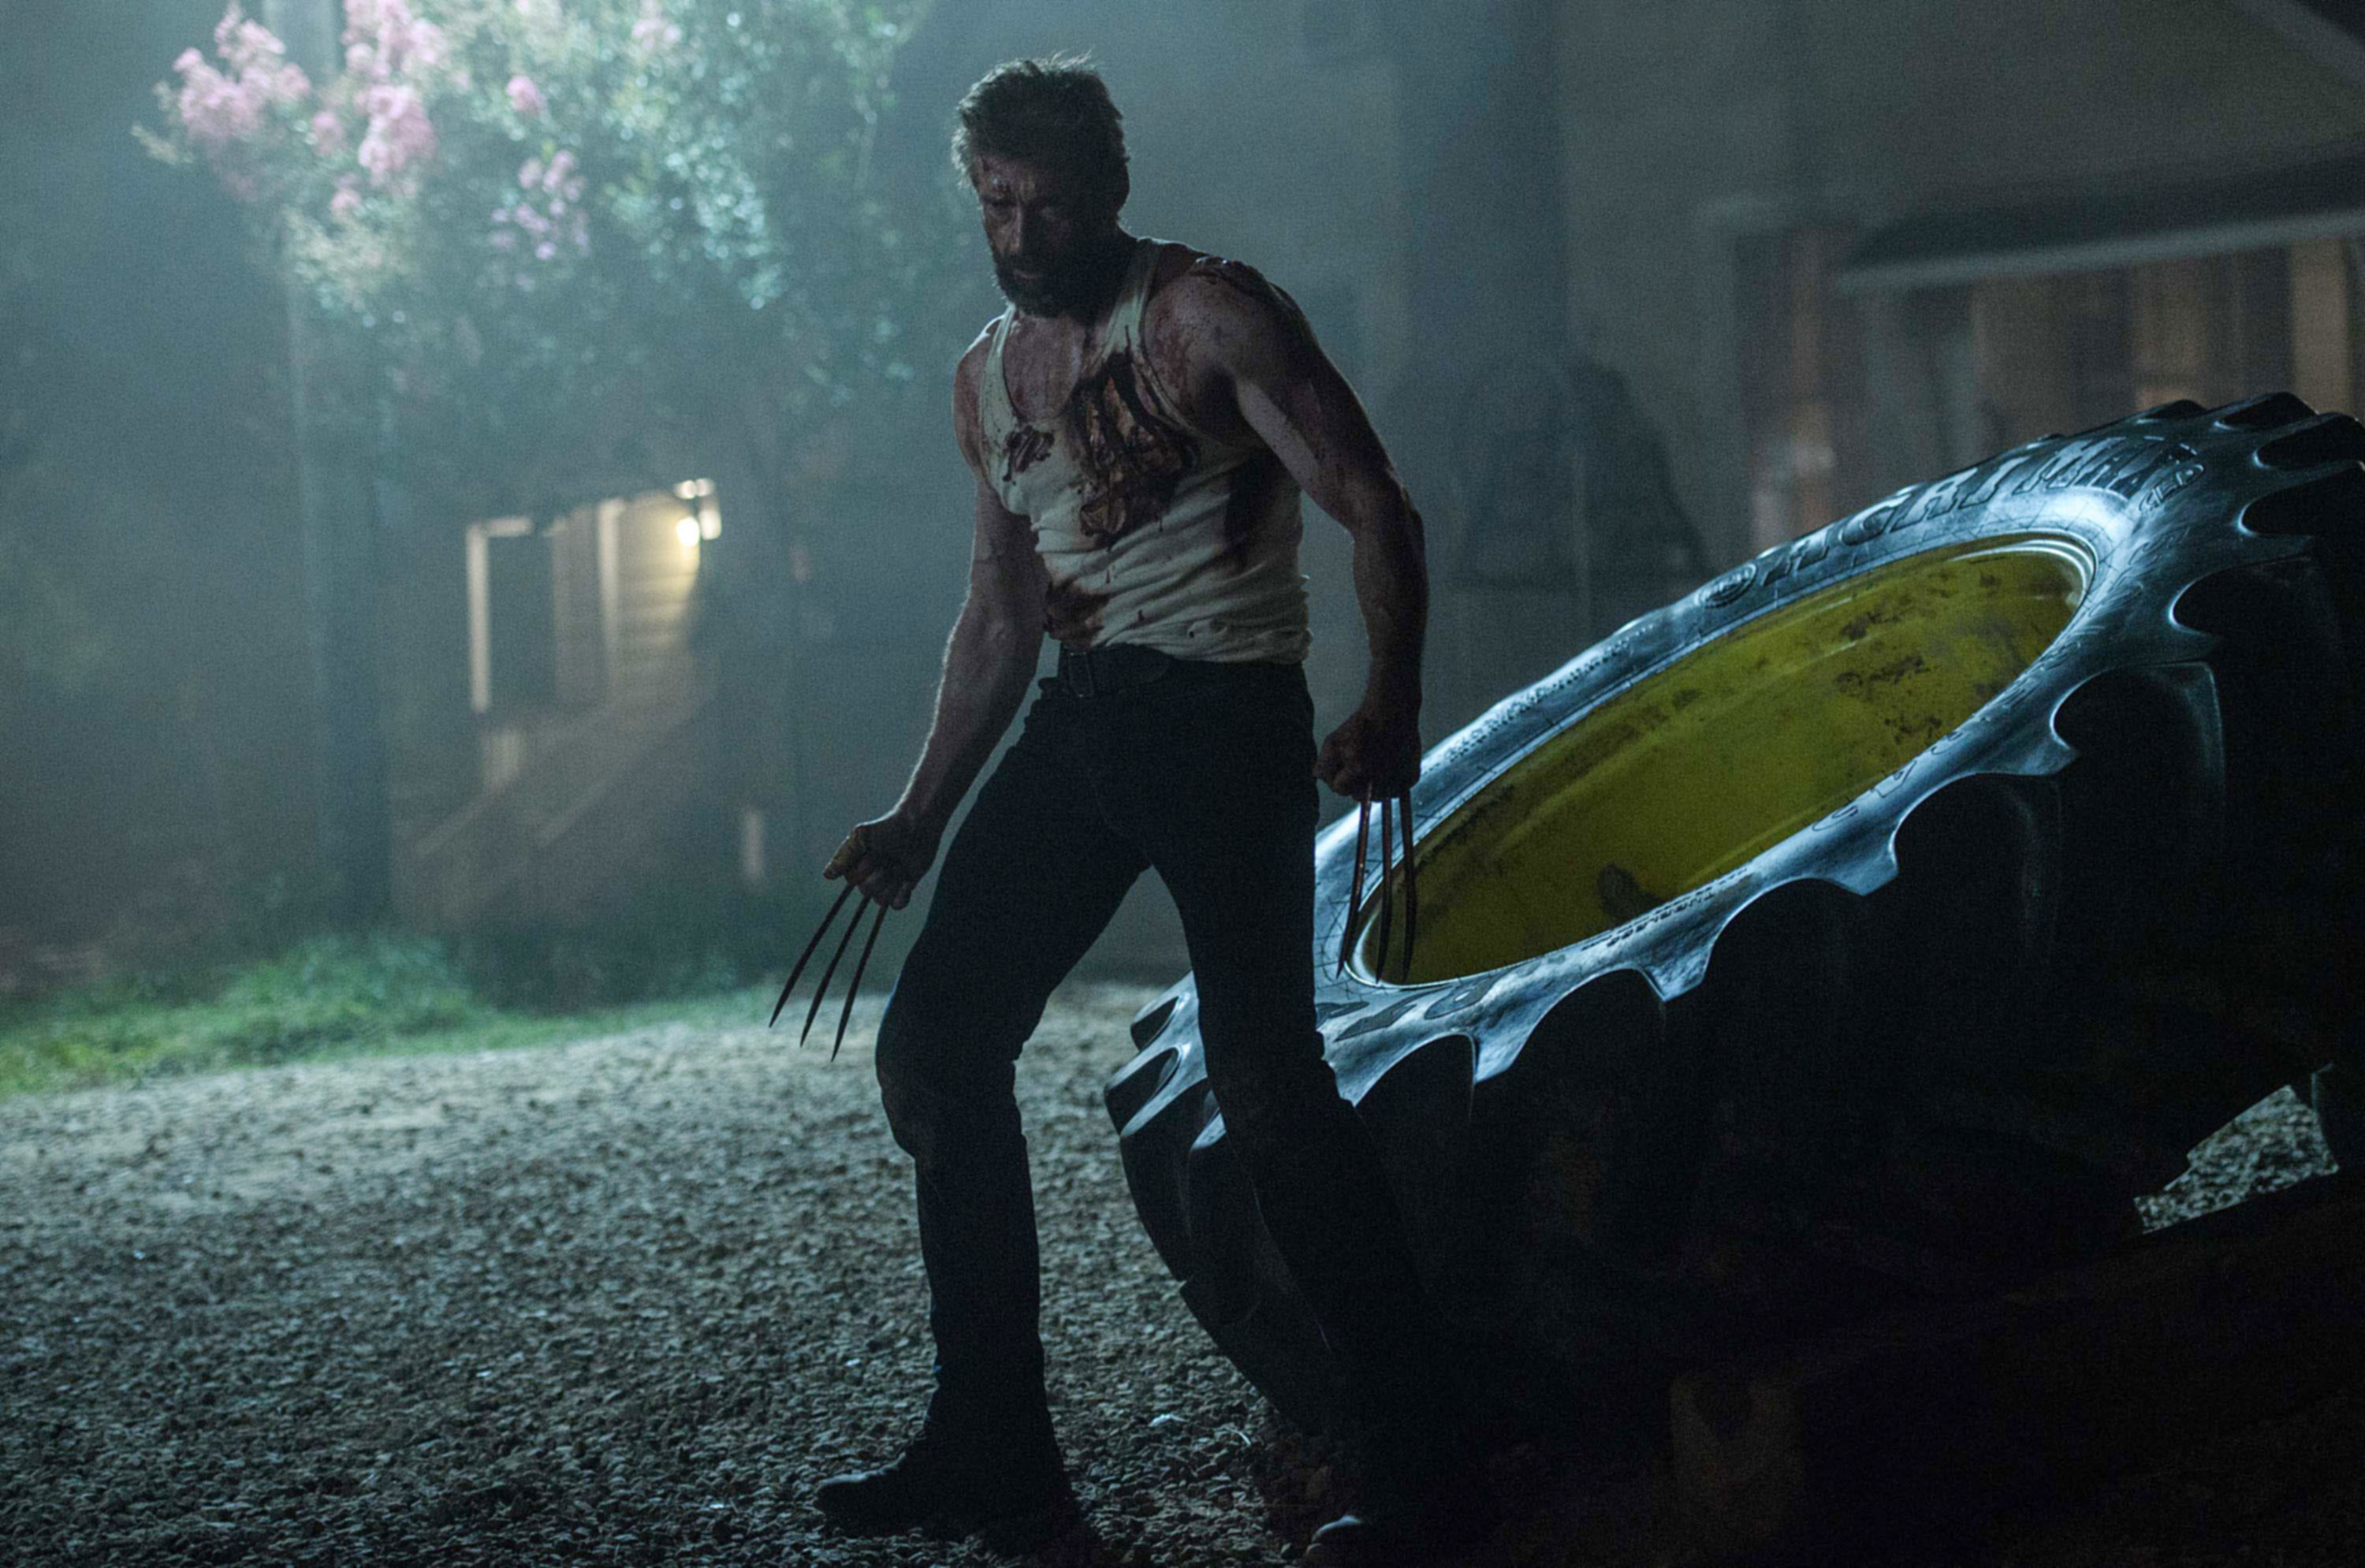 Wolverine with his claws out at night standing next to a huge tire